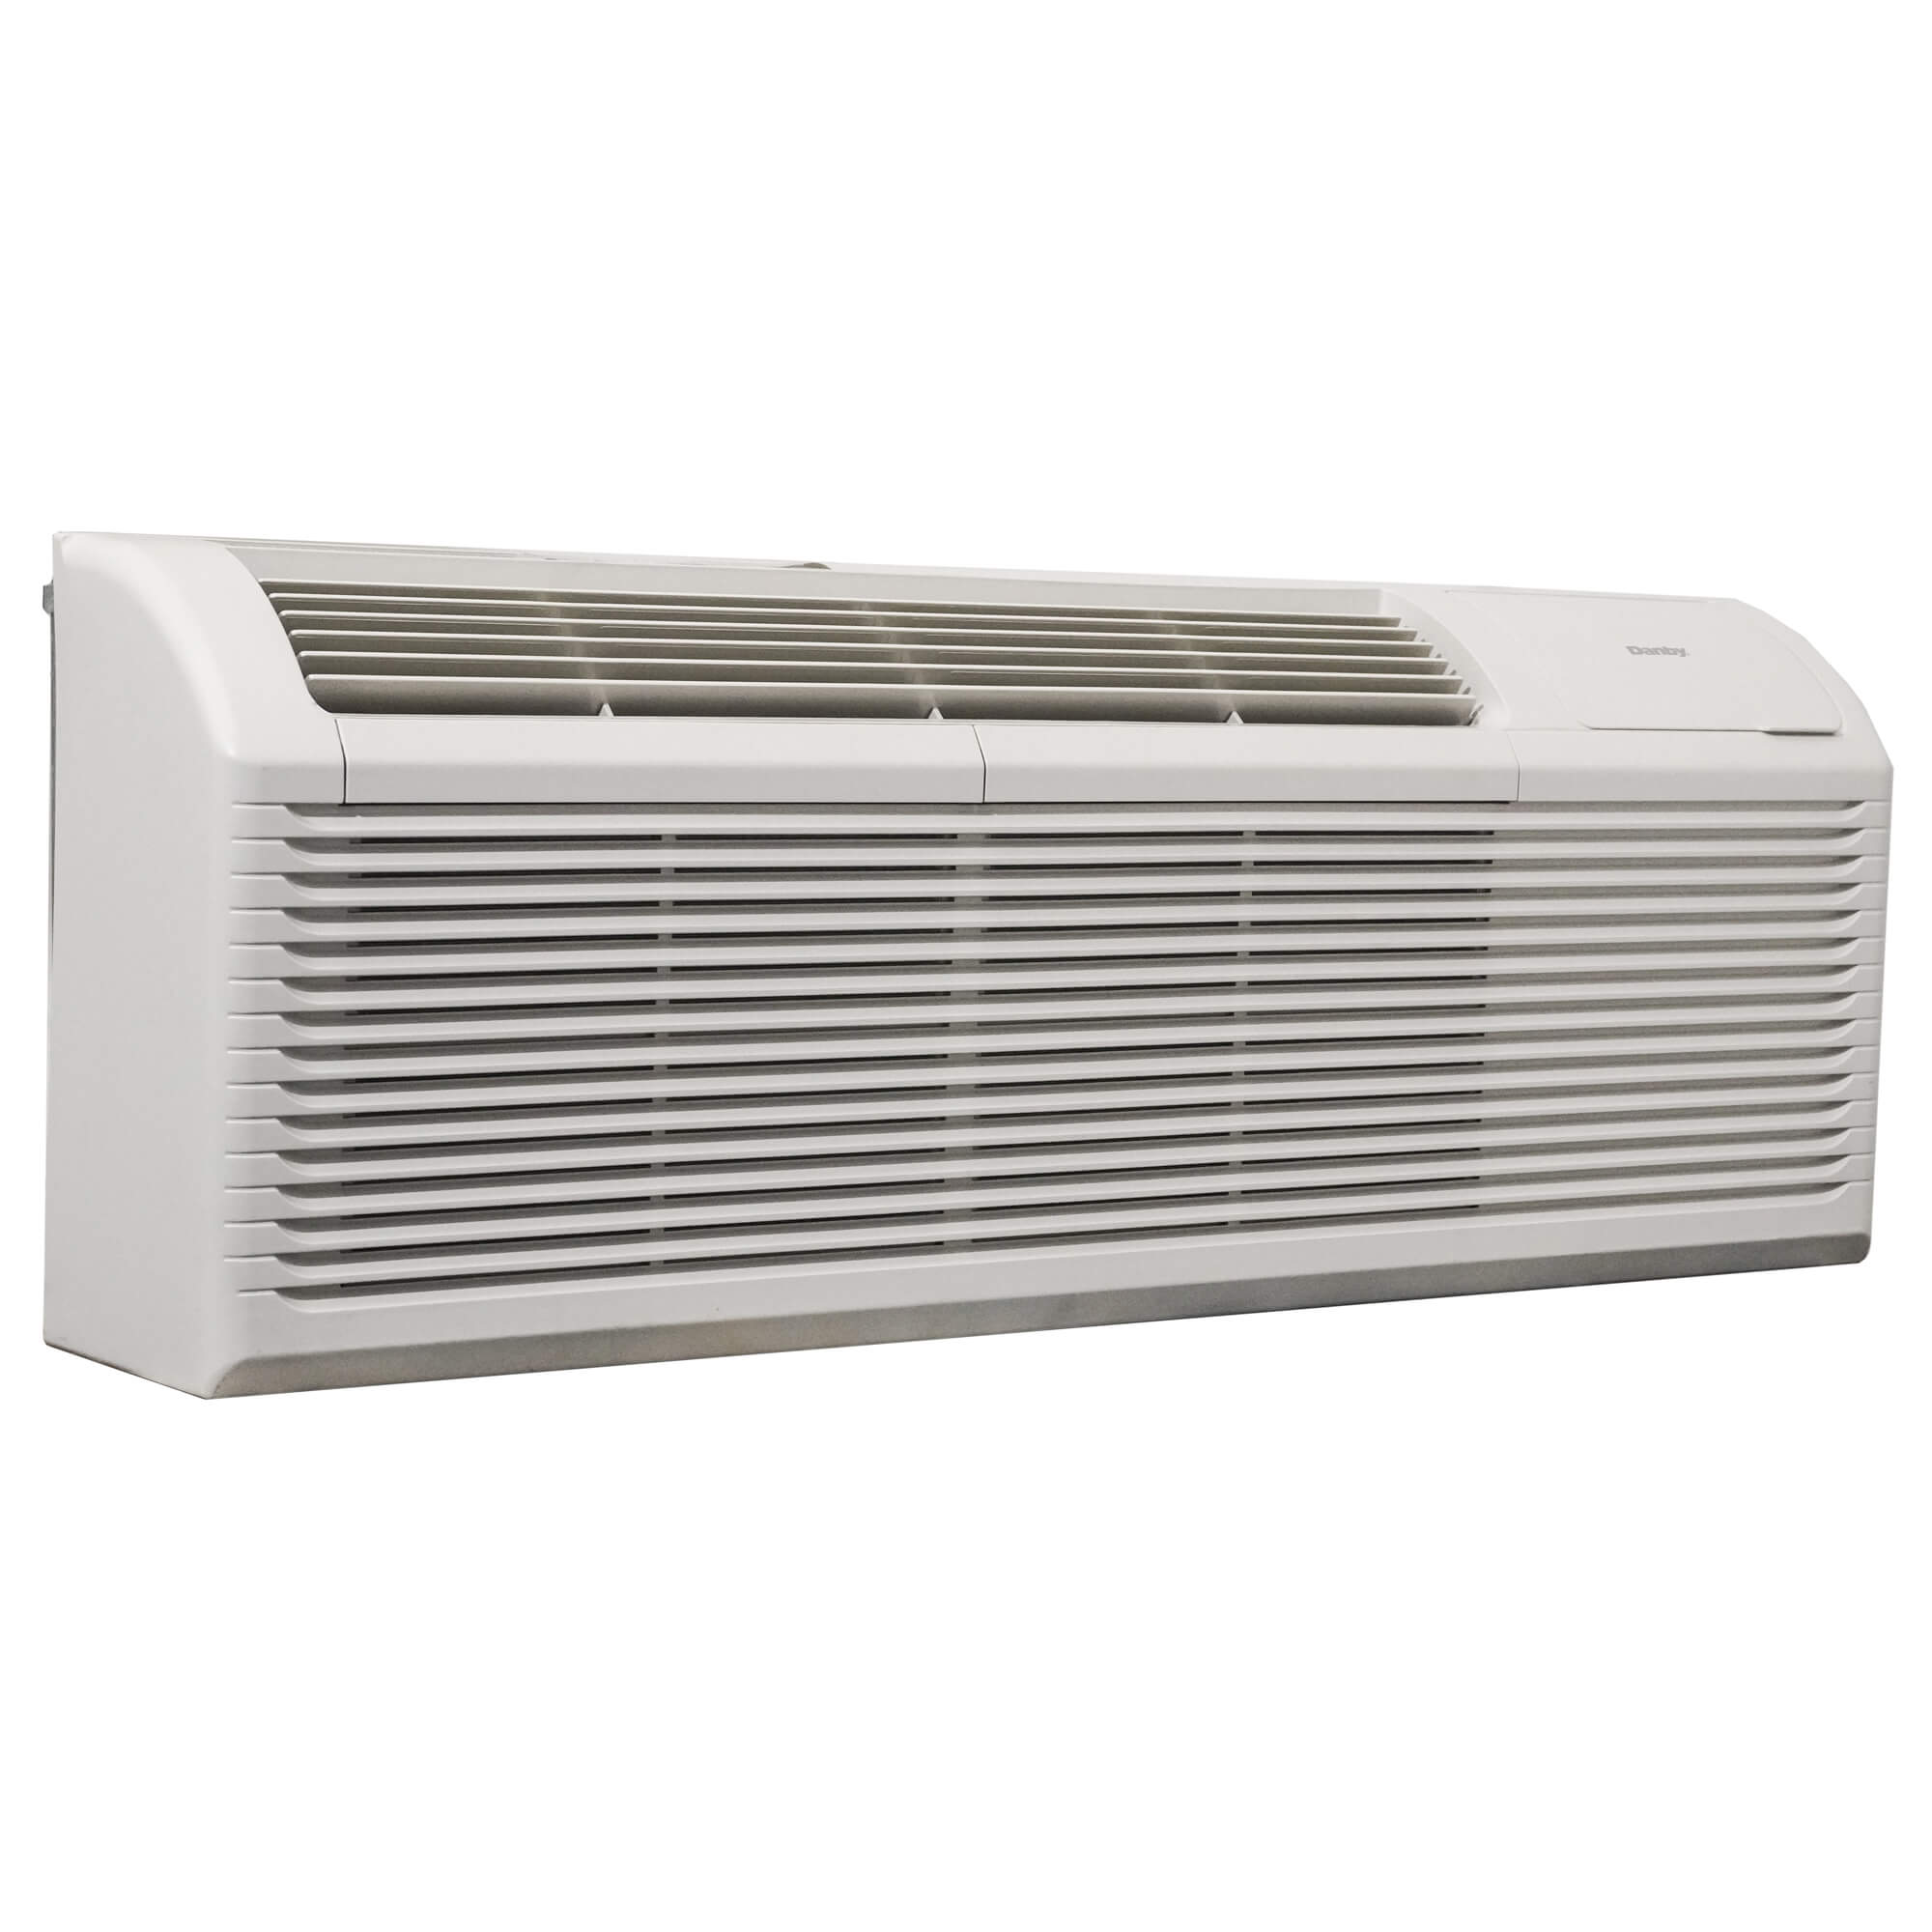 Danby 12,000 BTU Packaged Terminal Air Conditioner with Heat Pump